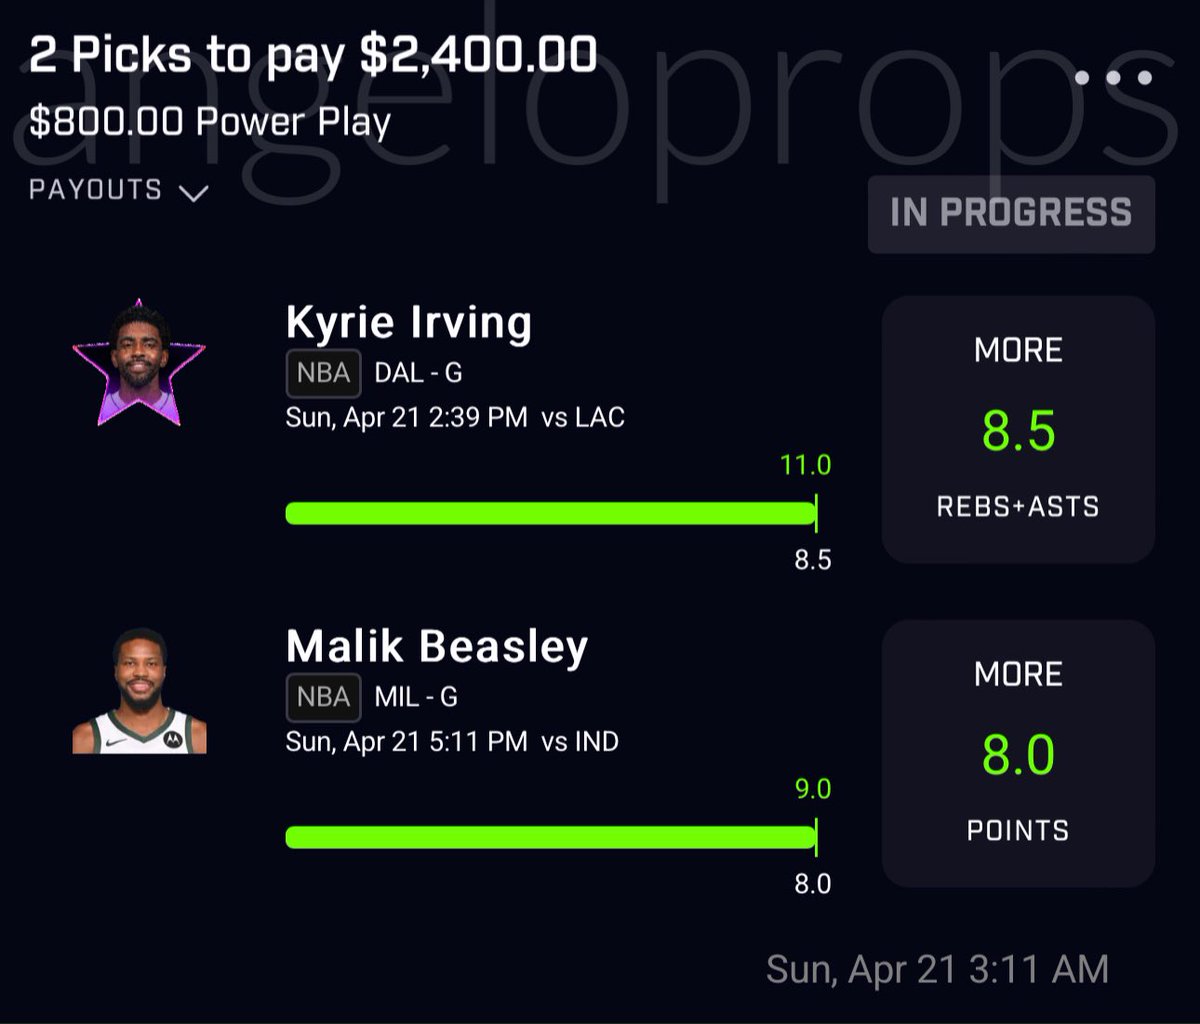 💸💸💸 Cash the discord exclusive slip, cashapping $250 to one person that likes this tweet. Must like to enter good luck 🤝 #Nba #PrizePicks